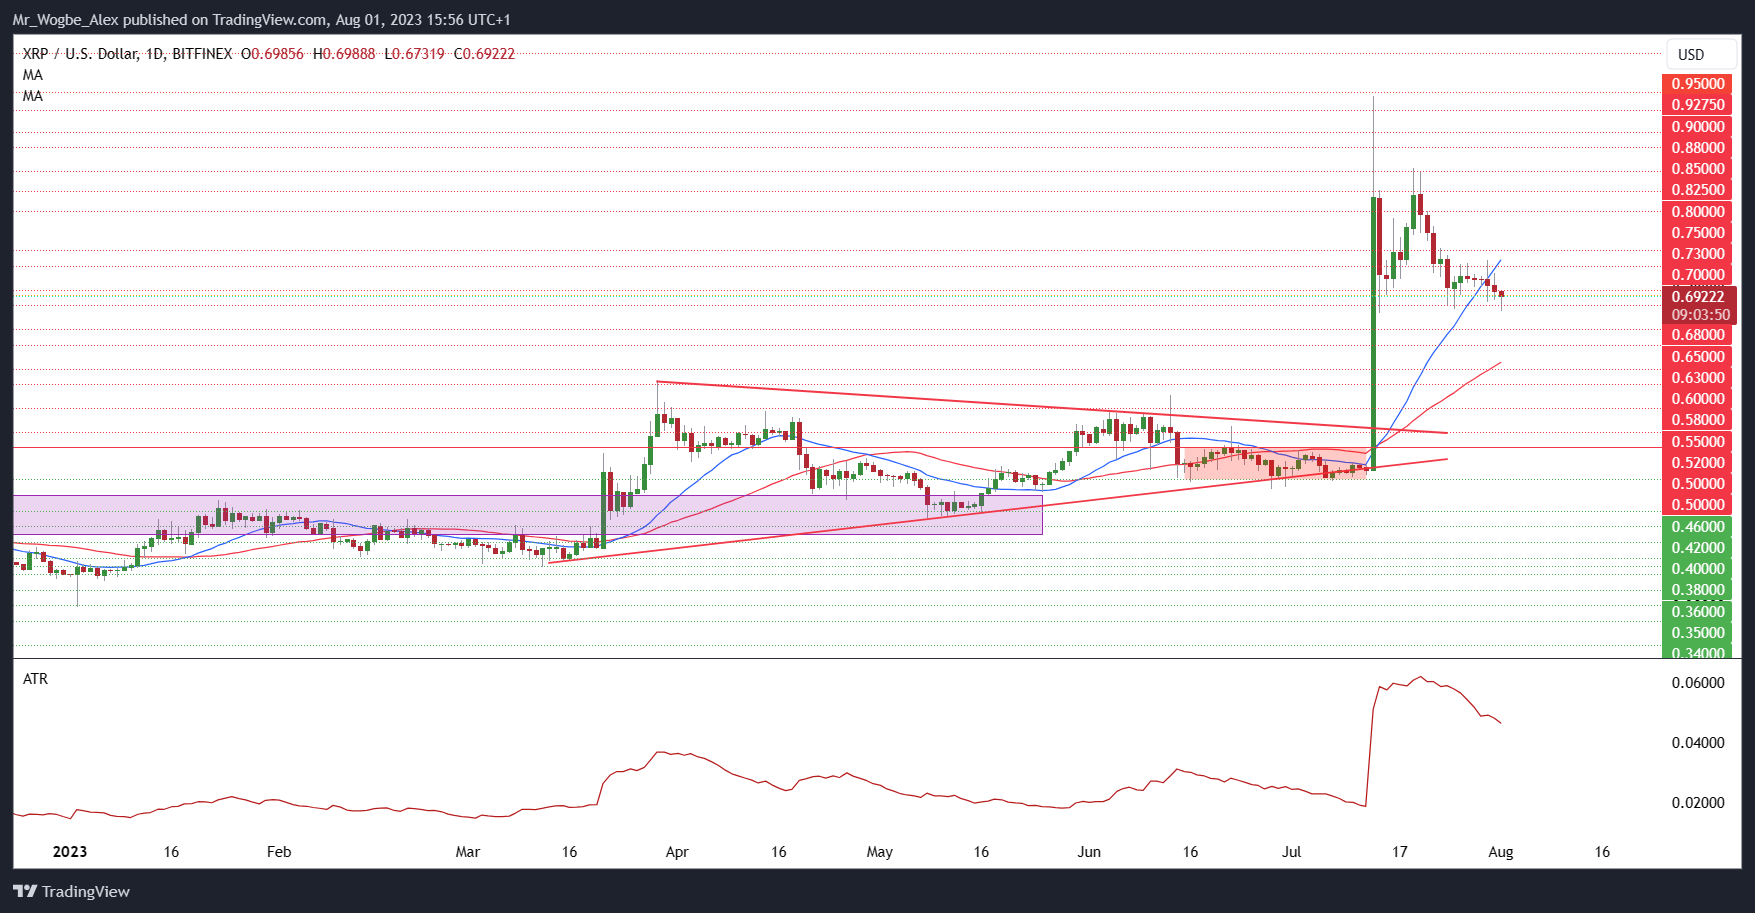 XRP/USD daily chart from TradingView